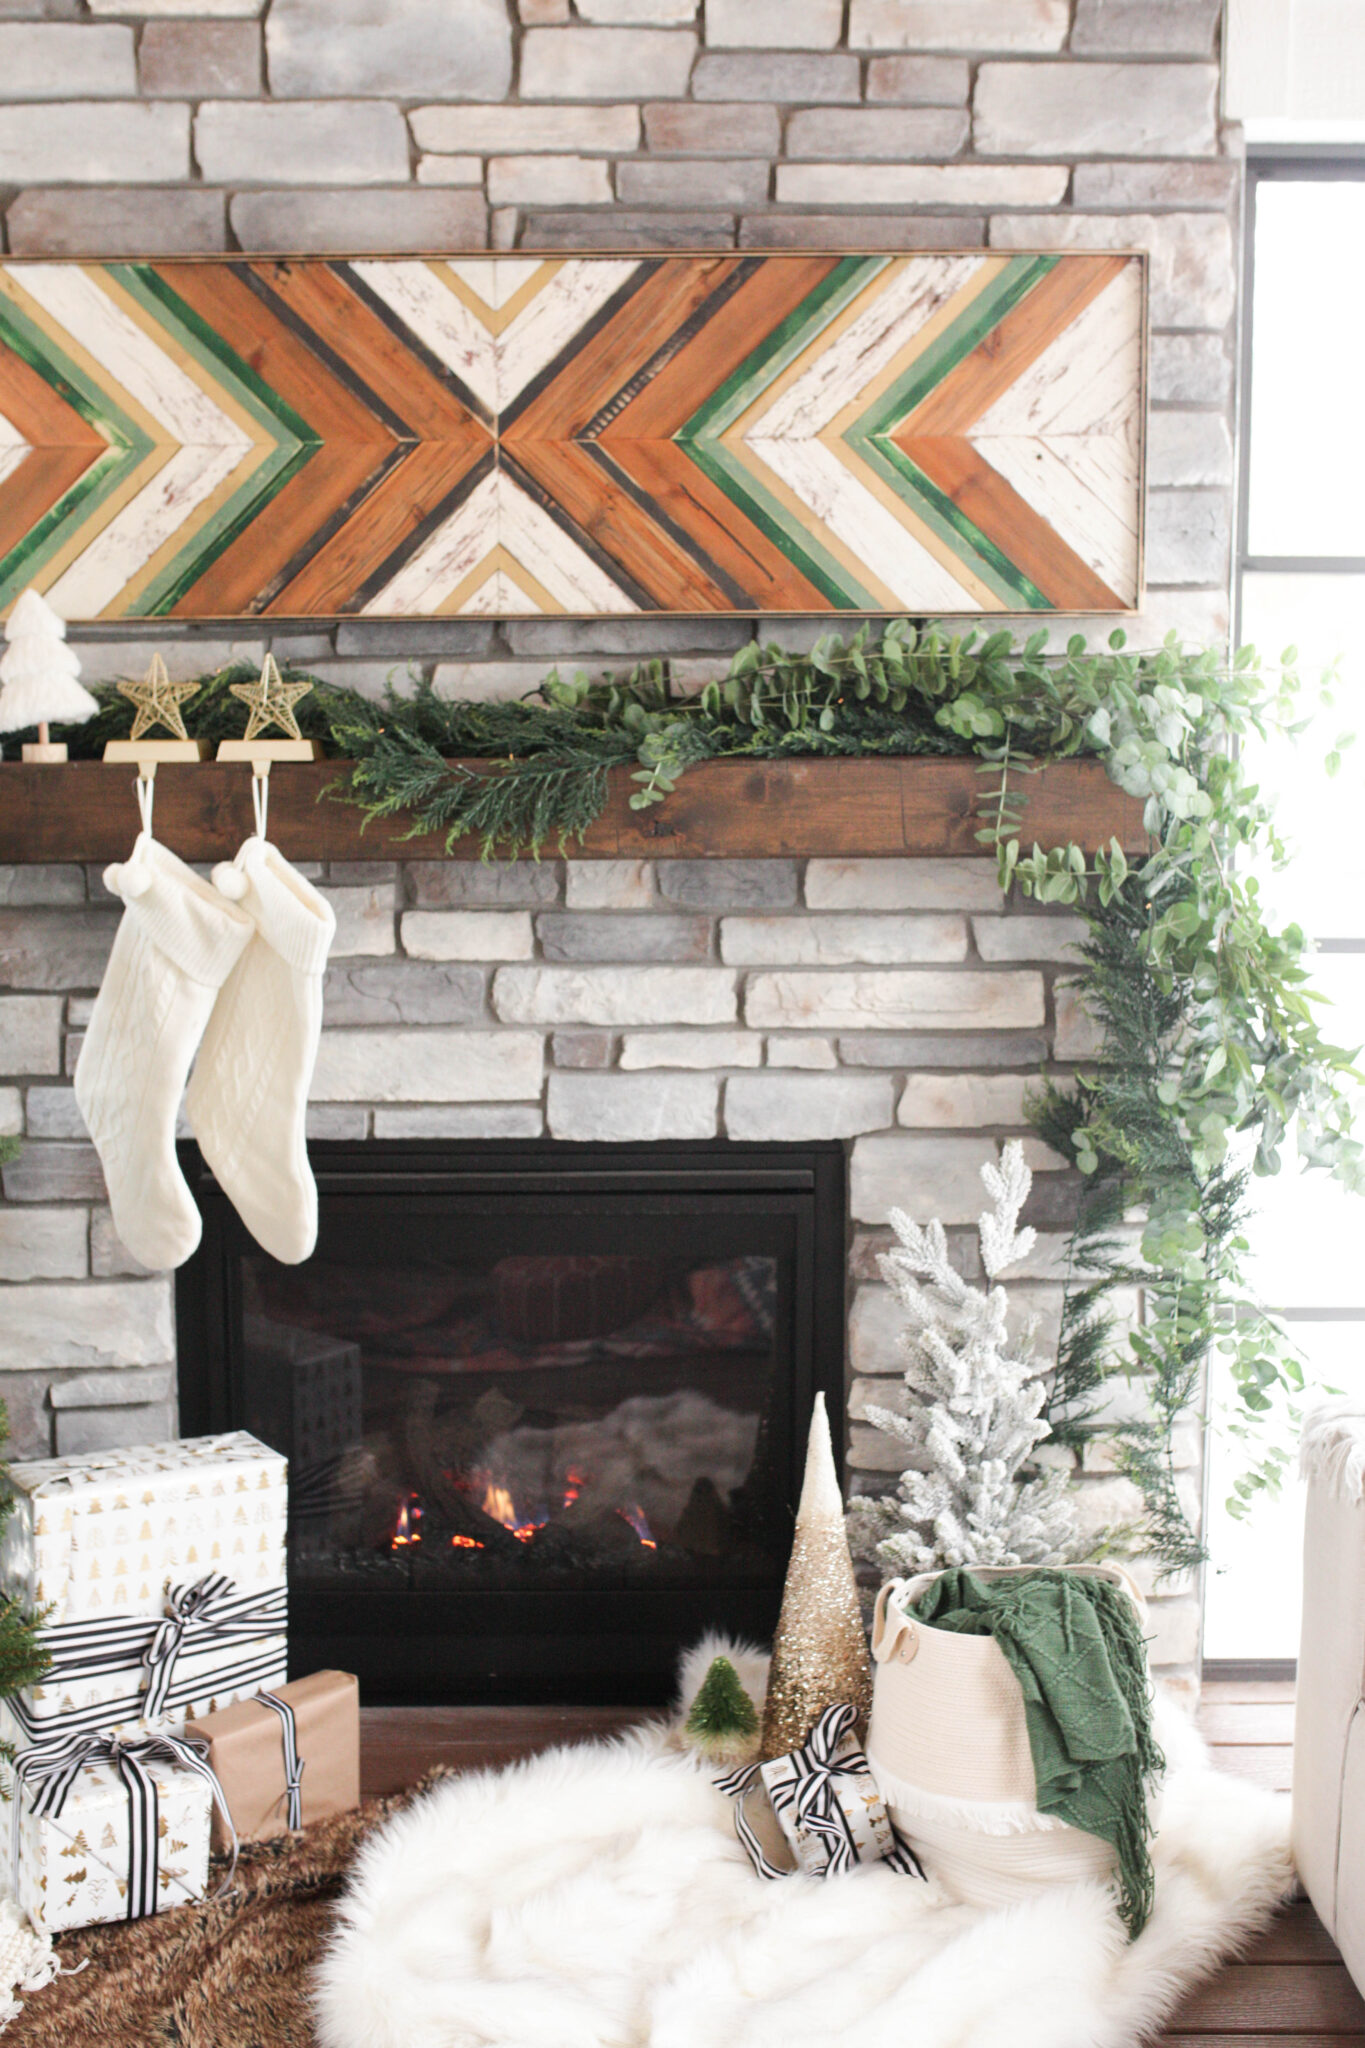 holiday decor - mantle with greenery, stockings and fireplace